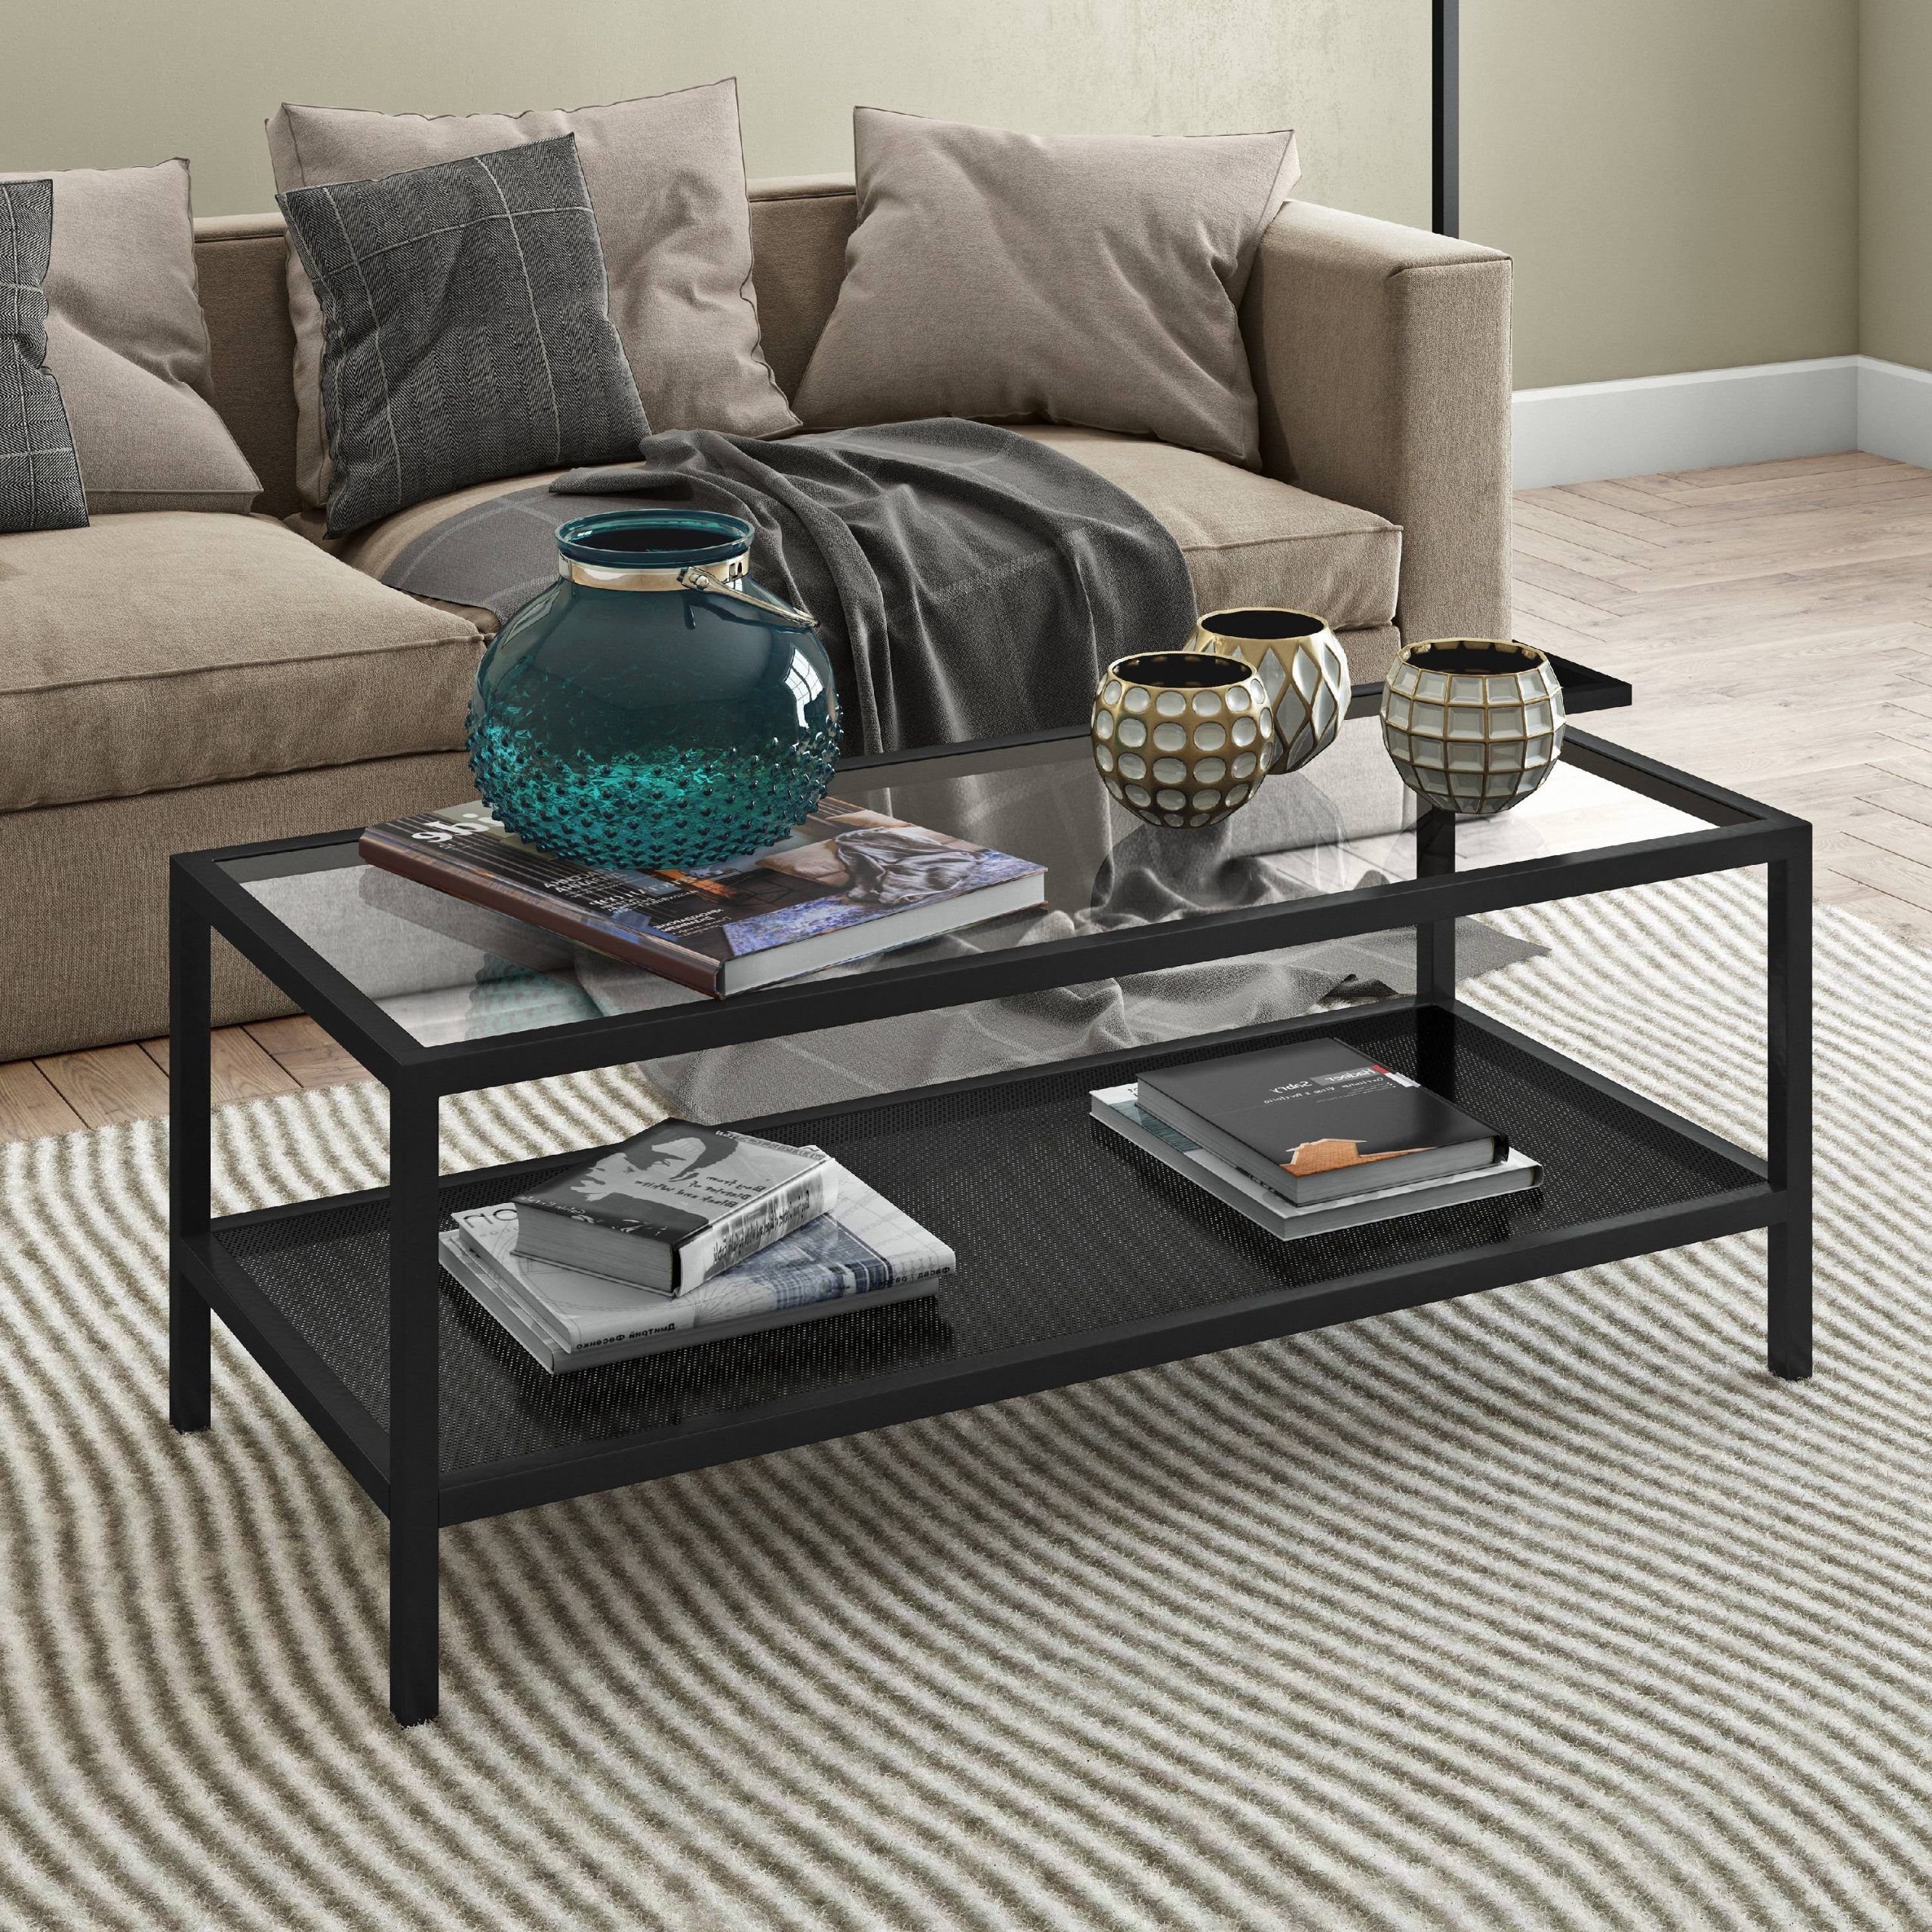 Evelyn&zoe Contemporary Metal Coffee Table With Glass Top – Walmart Regarding Glossy Finished Metal Coffee Tables (View 7 of 20)